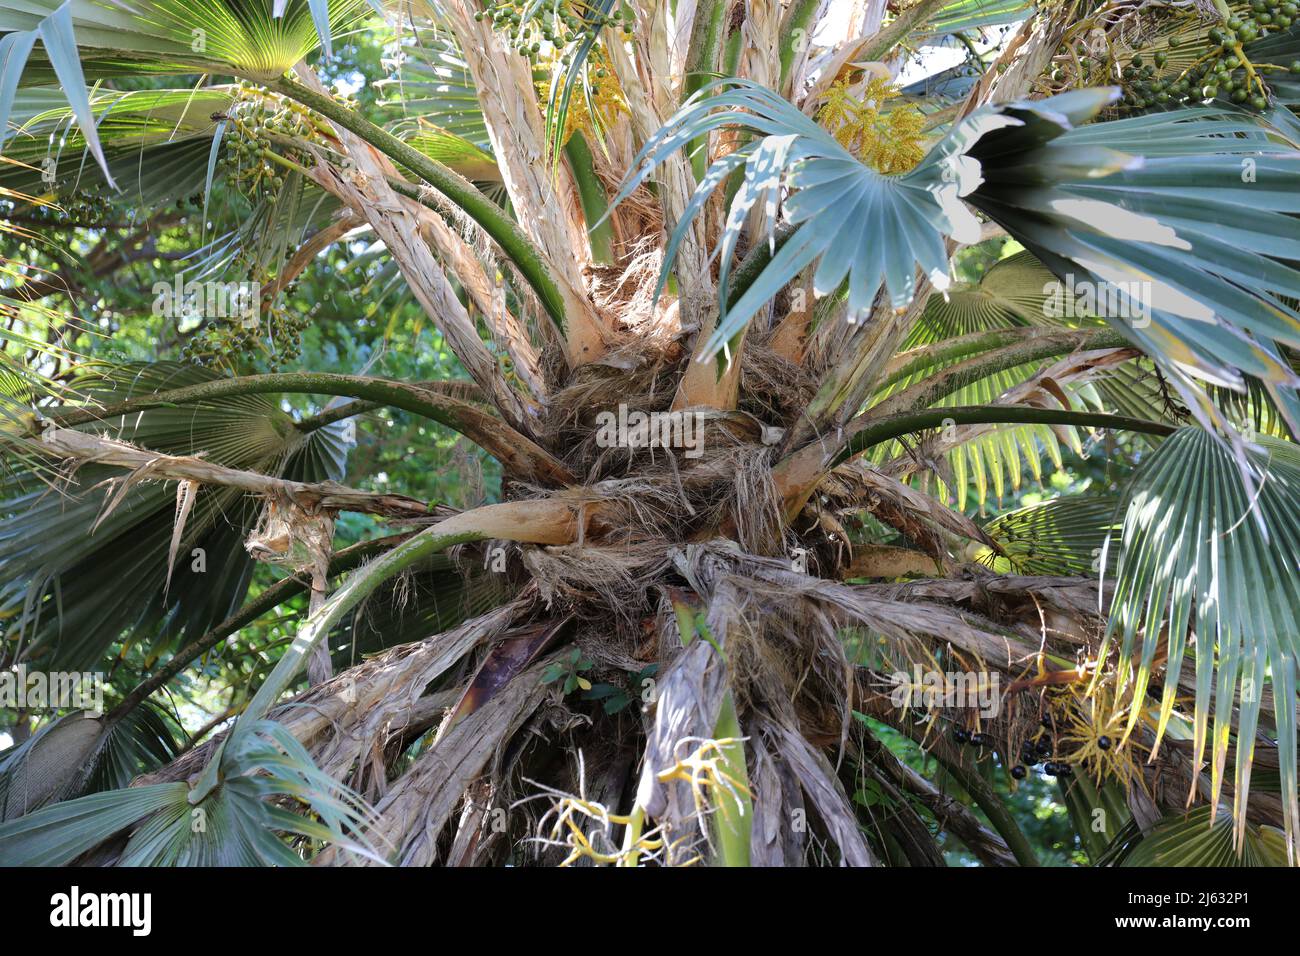 Fronds, leaves, fruiting branches and inflorescence at the crown of a Kamalo Pritchardia Fan Palm tree in Kauai, Hawaii, USA Stock Photo